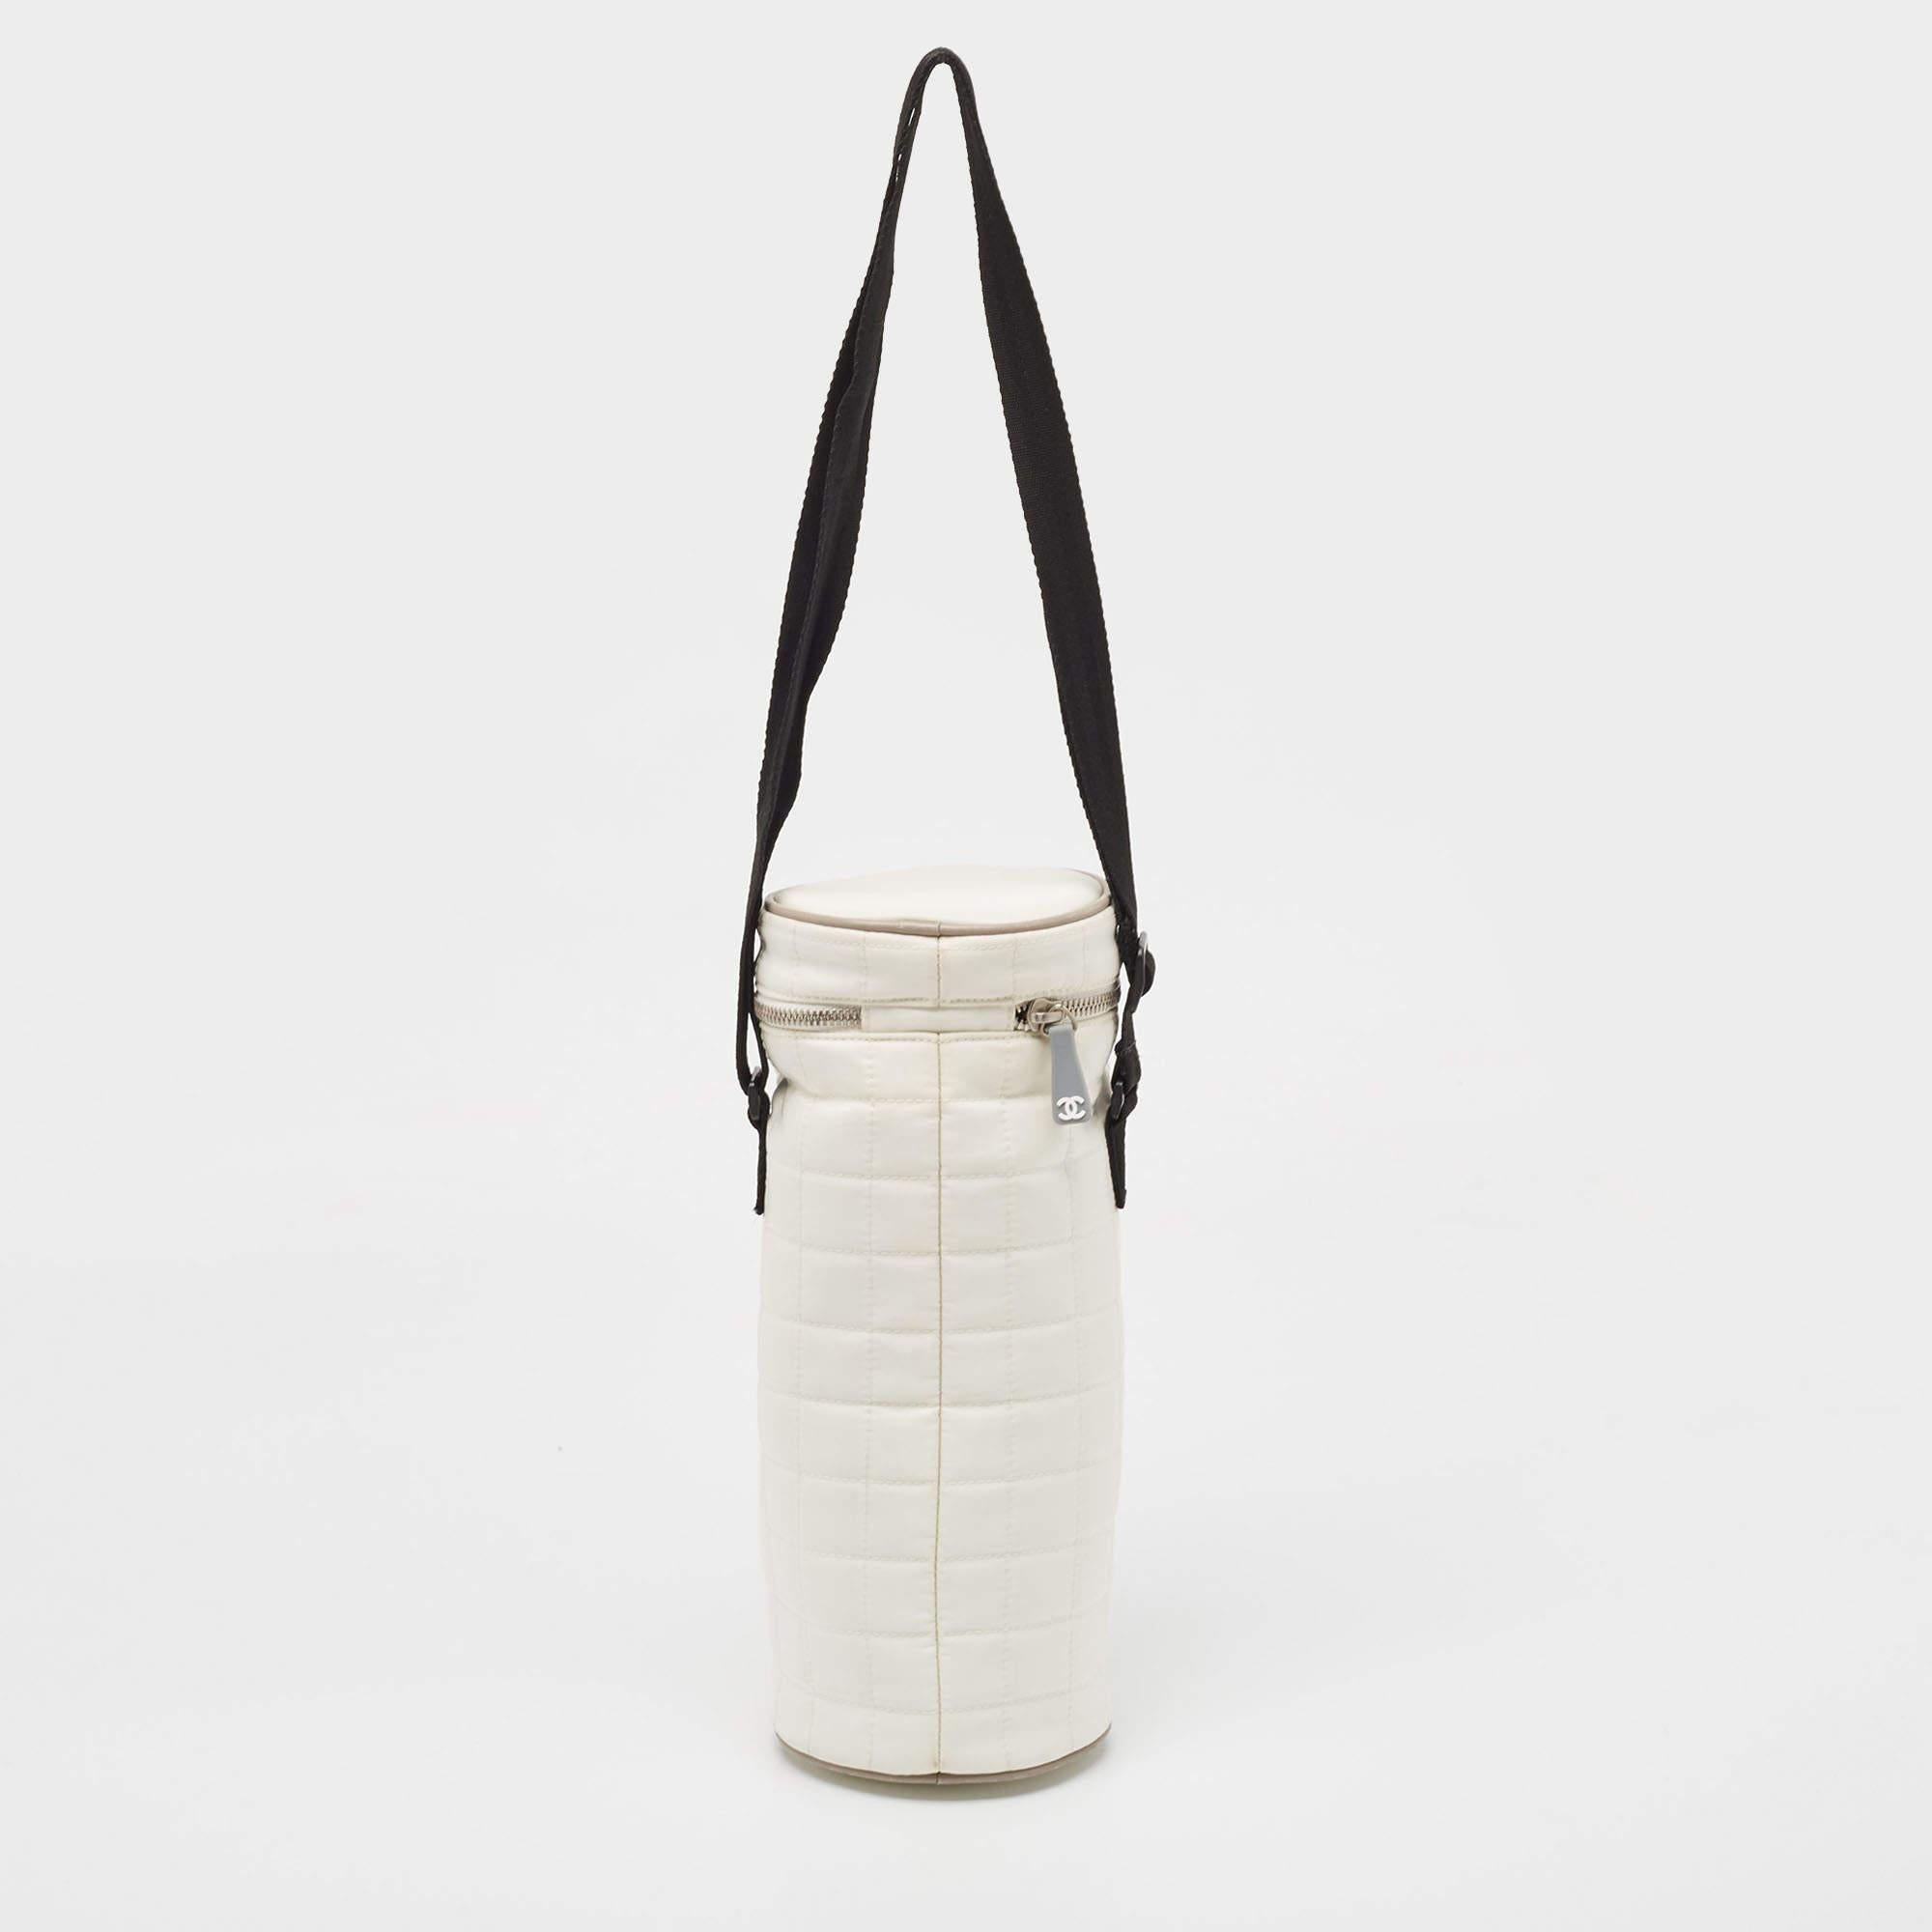 Chanel's bottle holder is perfect for when you're off to the gym or to the office. It is made of quilted nylon and it has a zip closure, front CC logo, and an adjustable strap.

